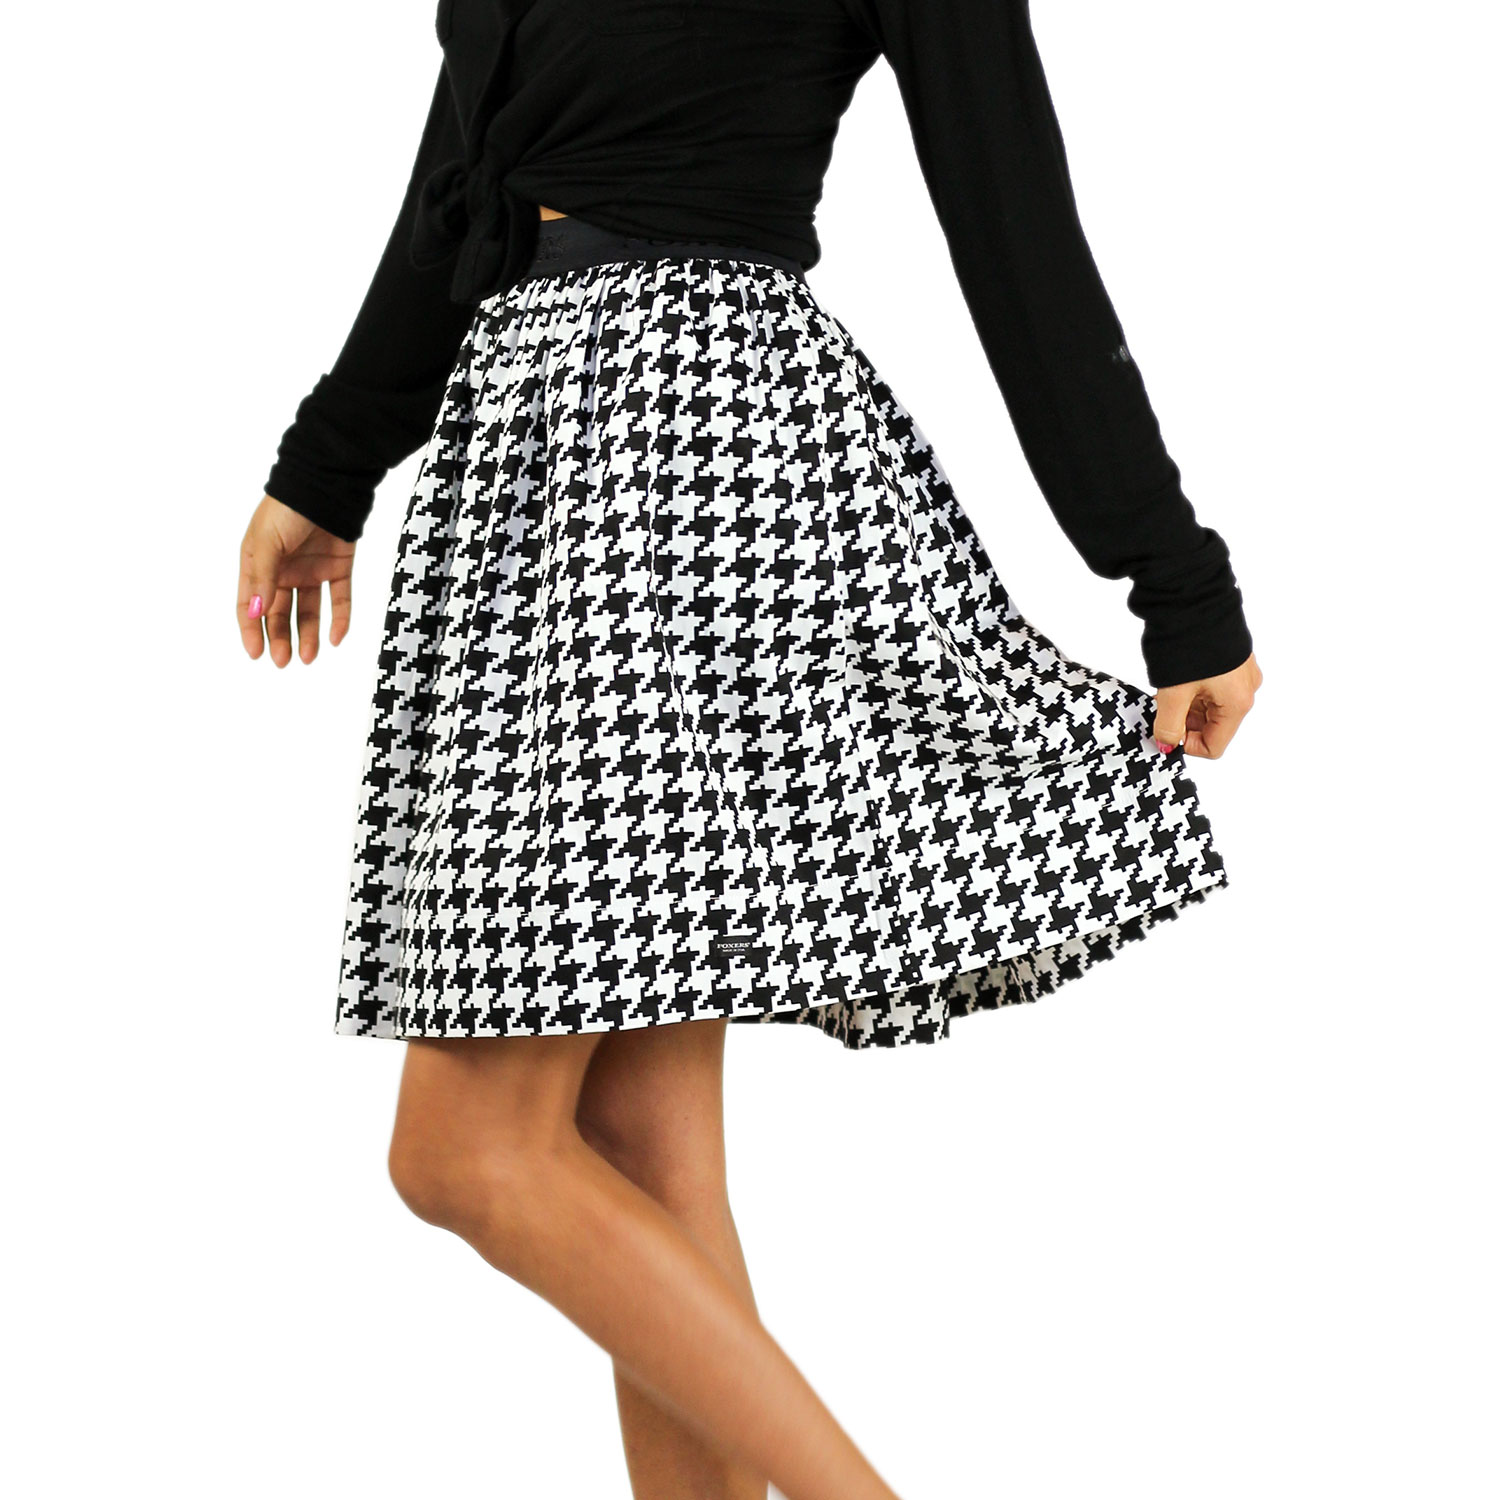 Black & White Houndstooth Skirt With Pockets